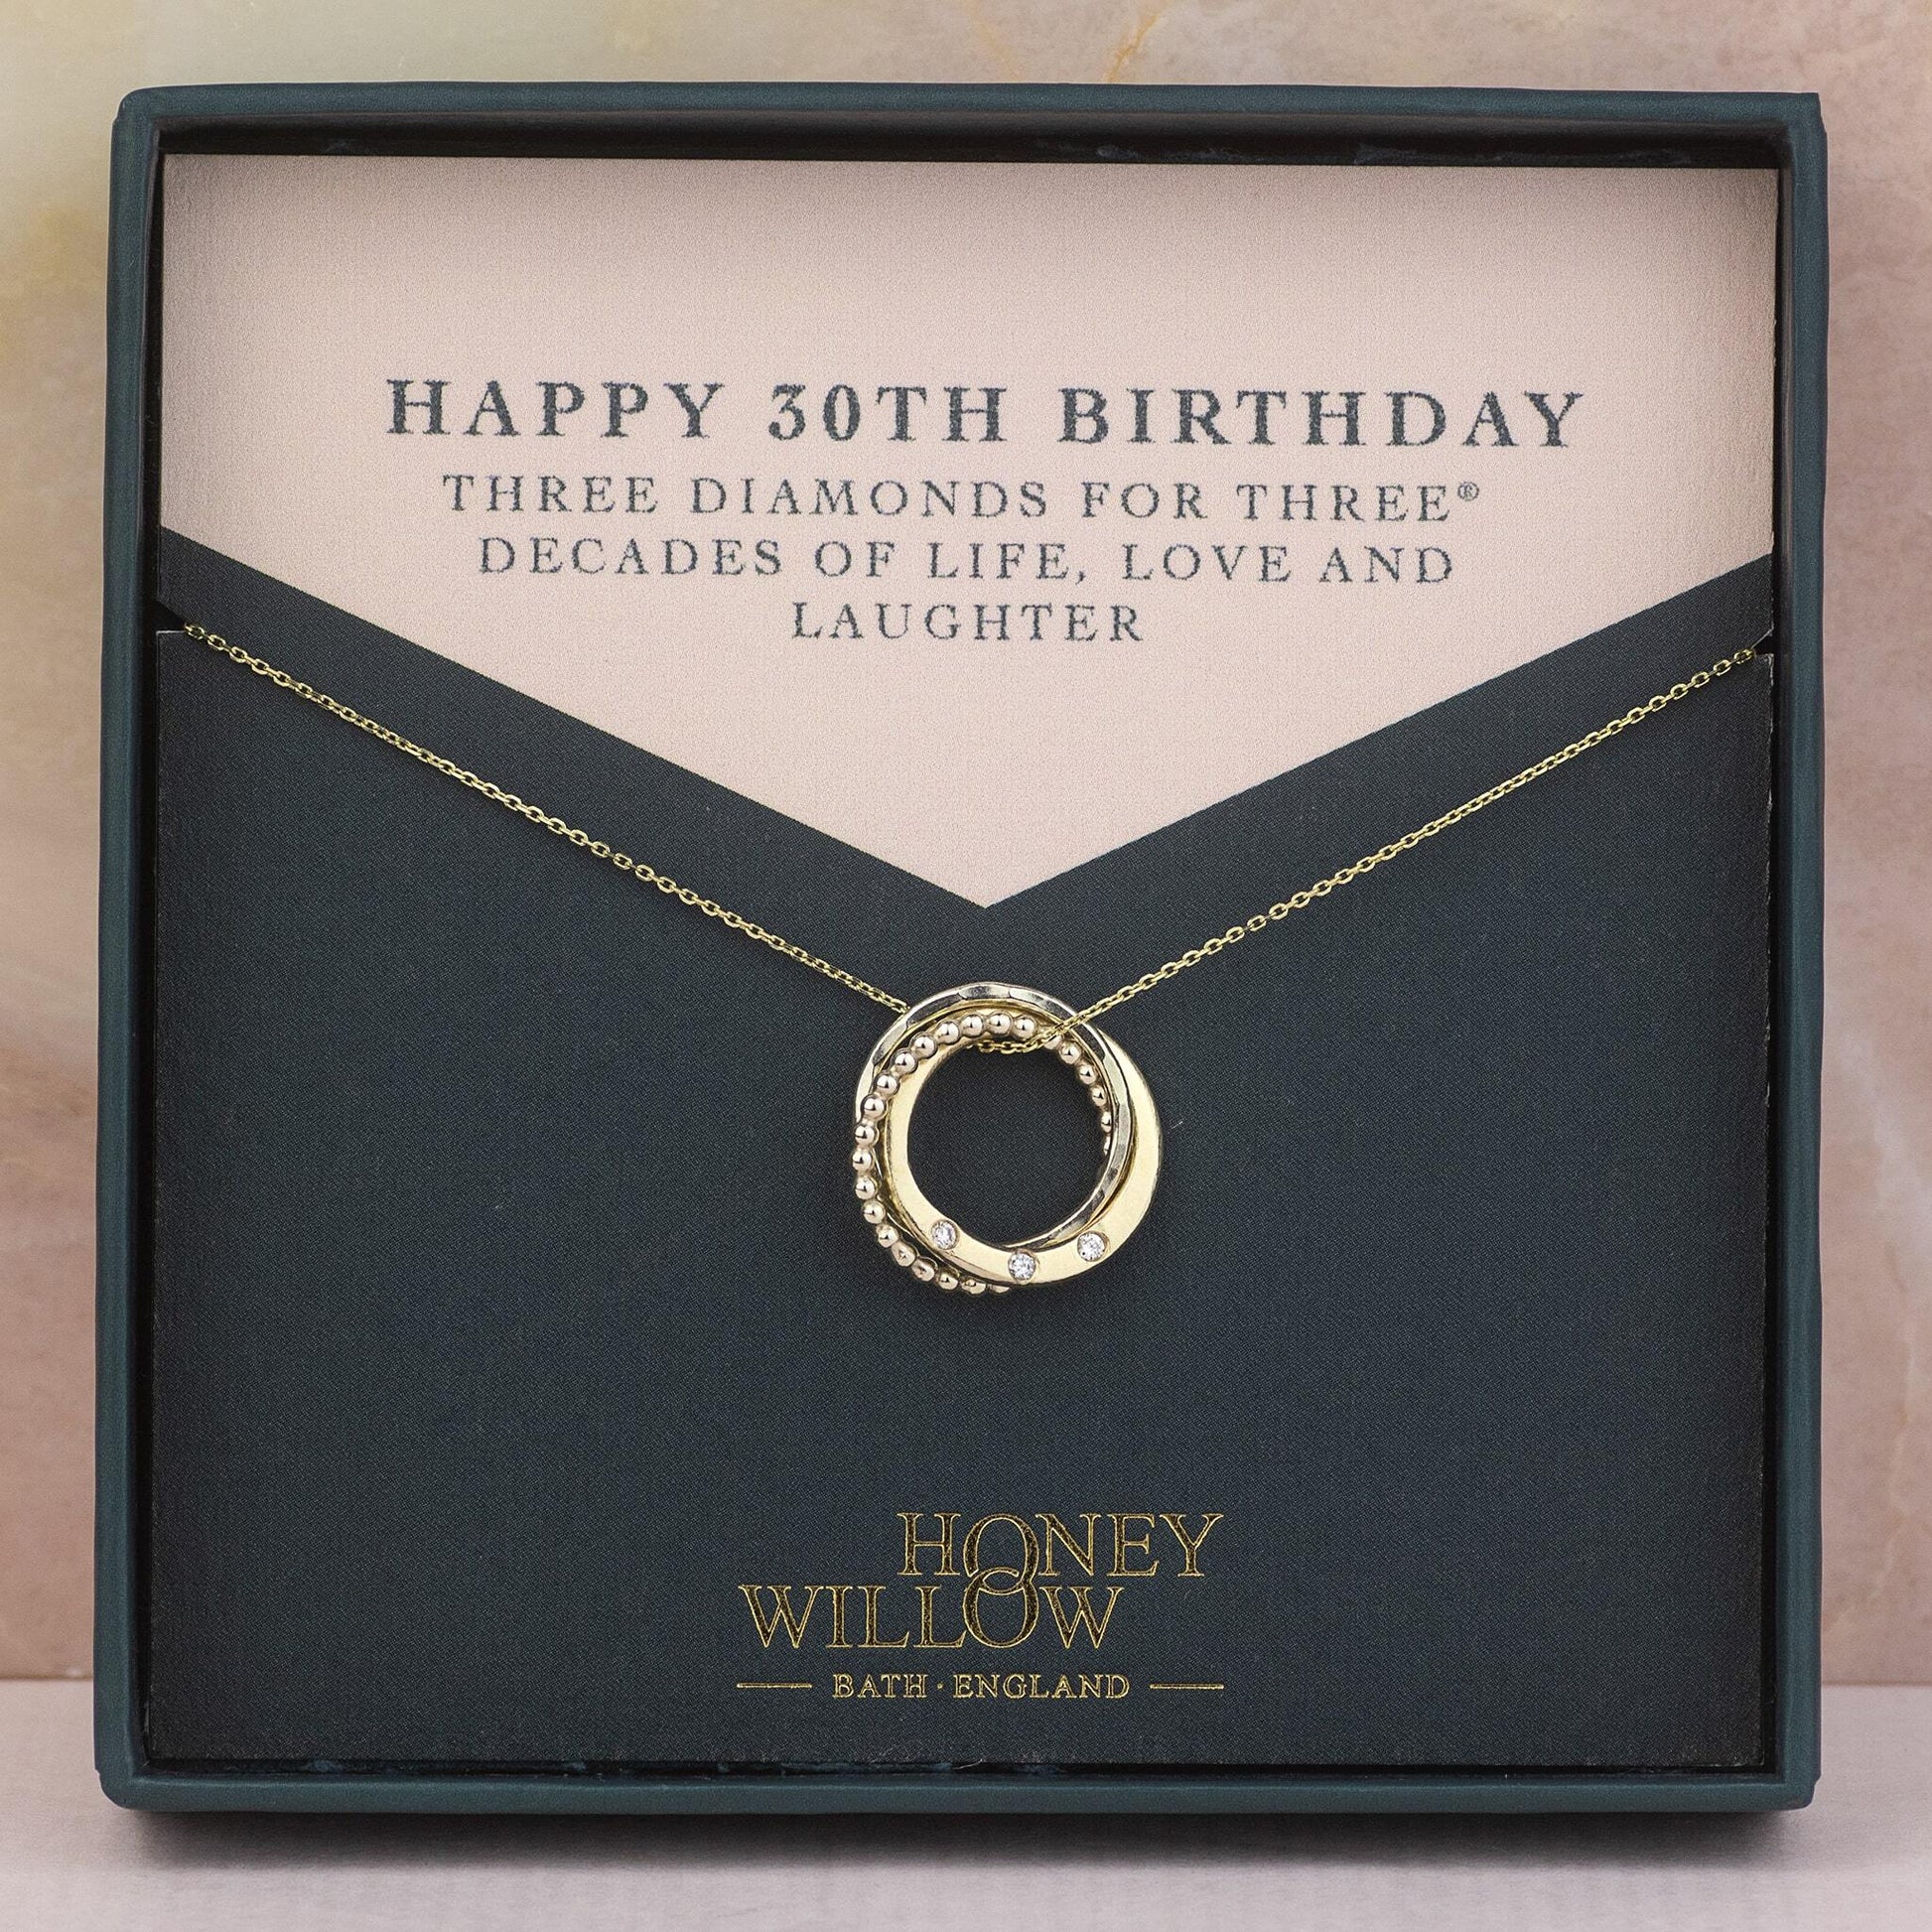 30th Birthday Necklace - 9kt Gold - 3 Diamonds for 3 Decades